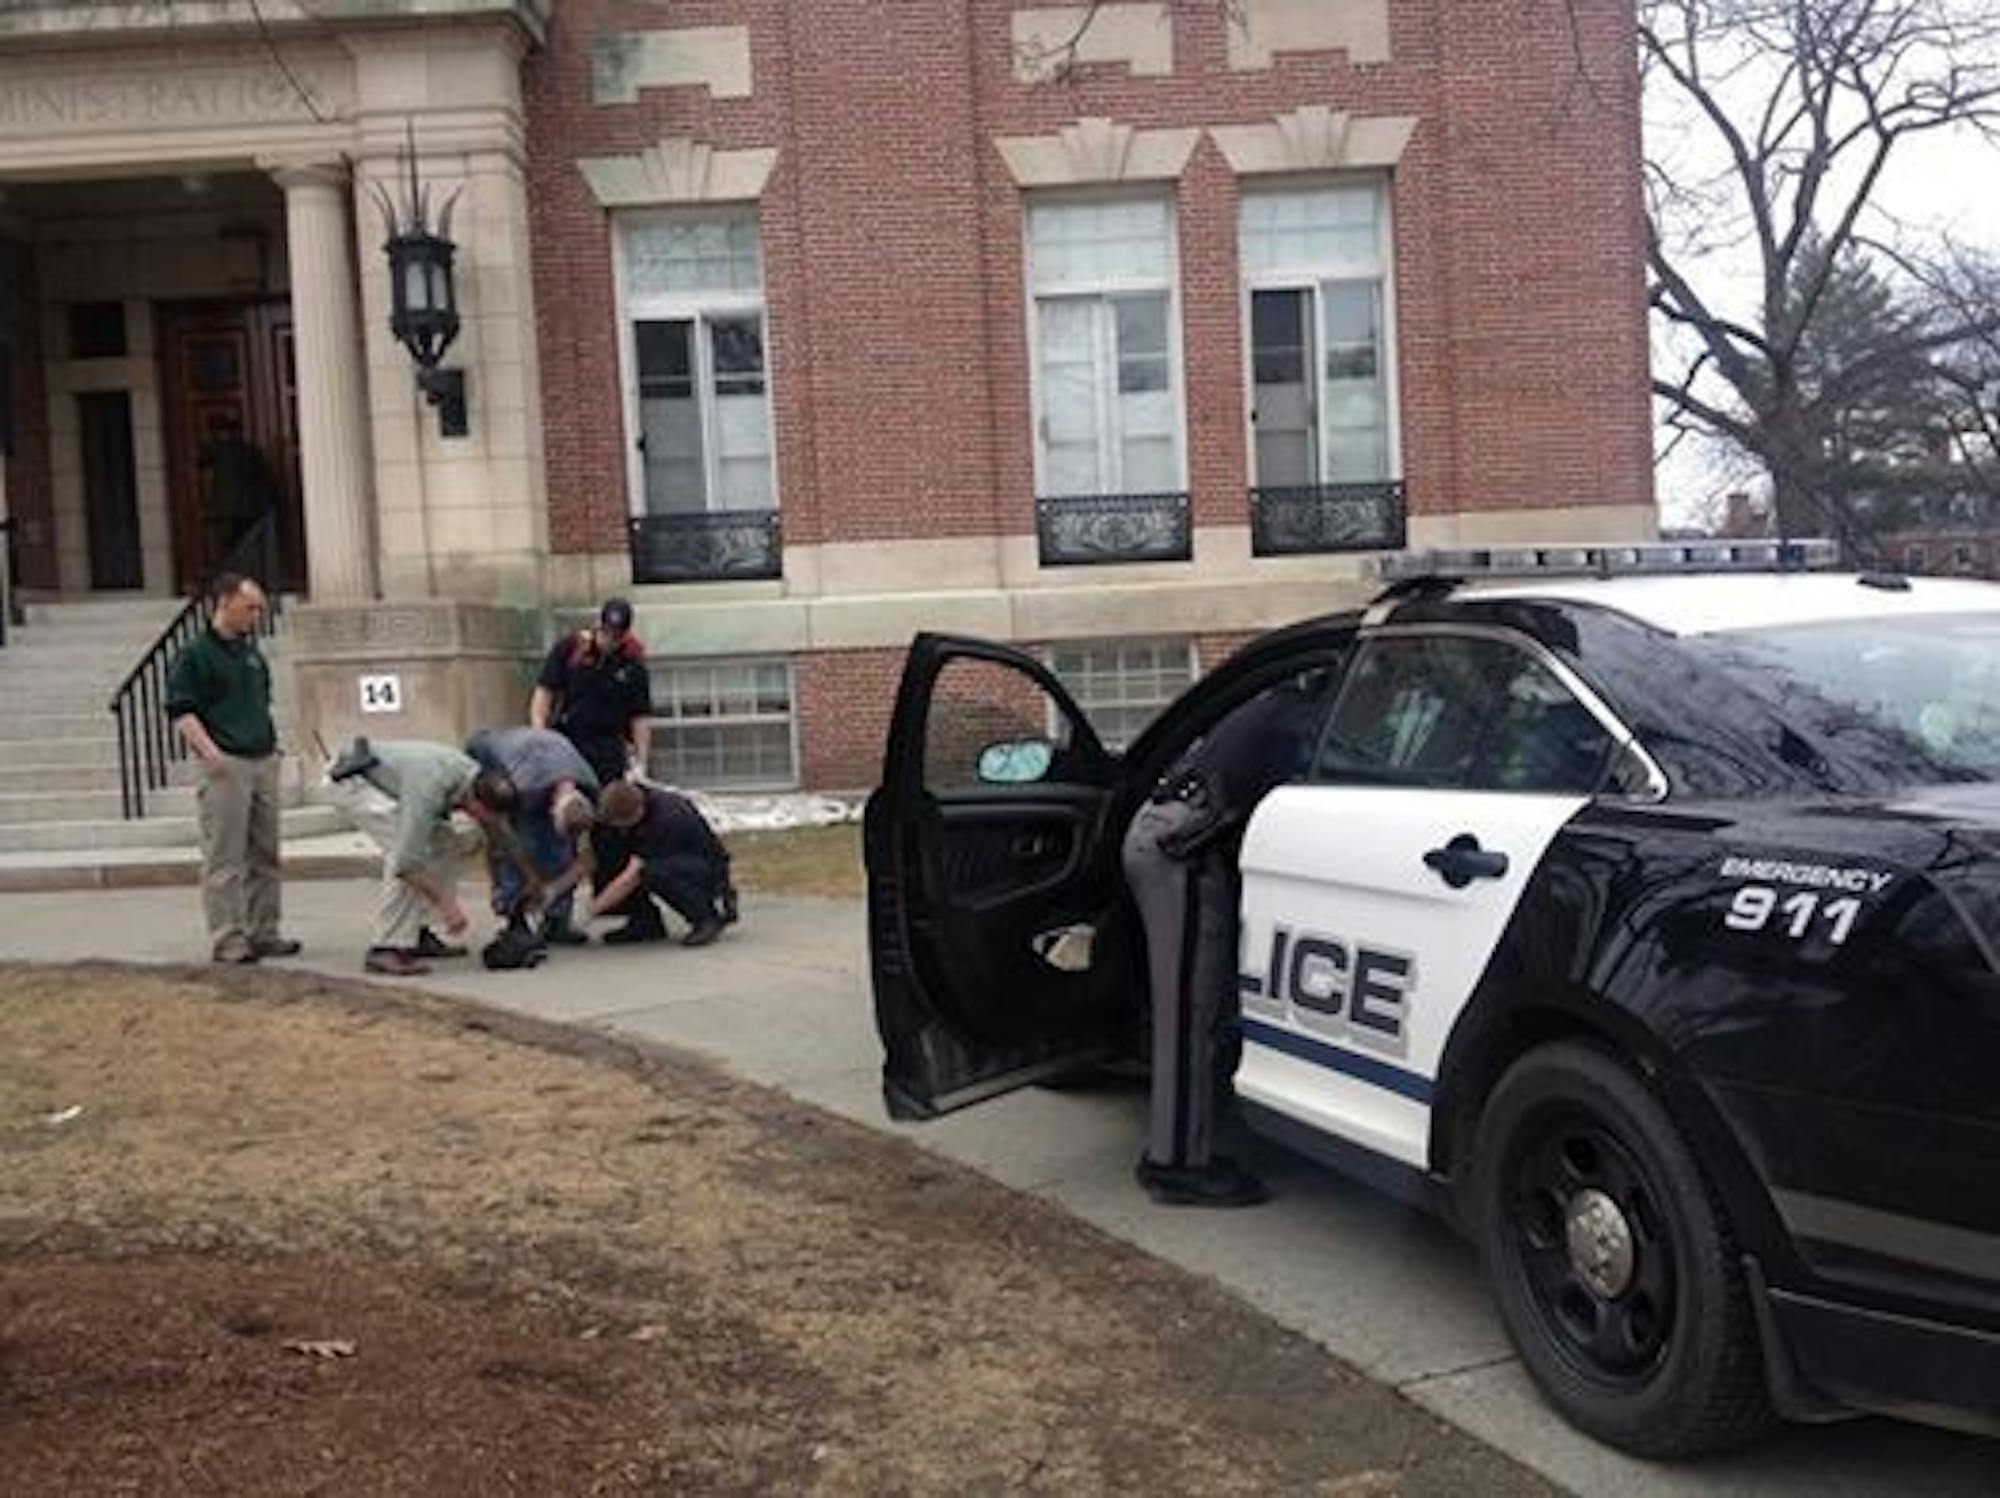 David Vincelette '84 was escorted out of Parkhurst Hall by Hanover Police Monday afternoon.